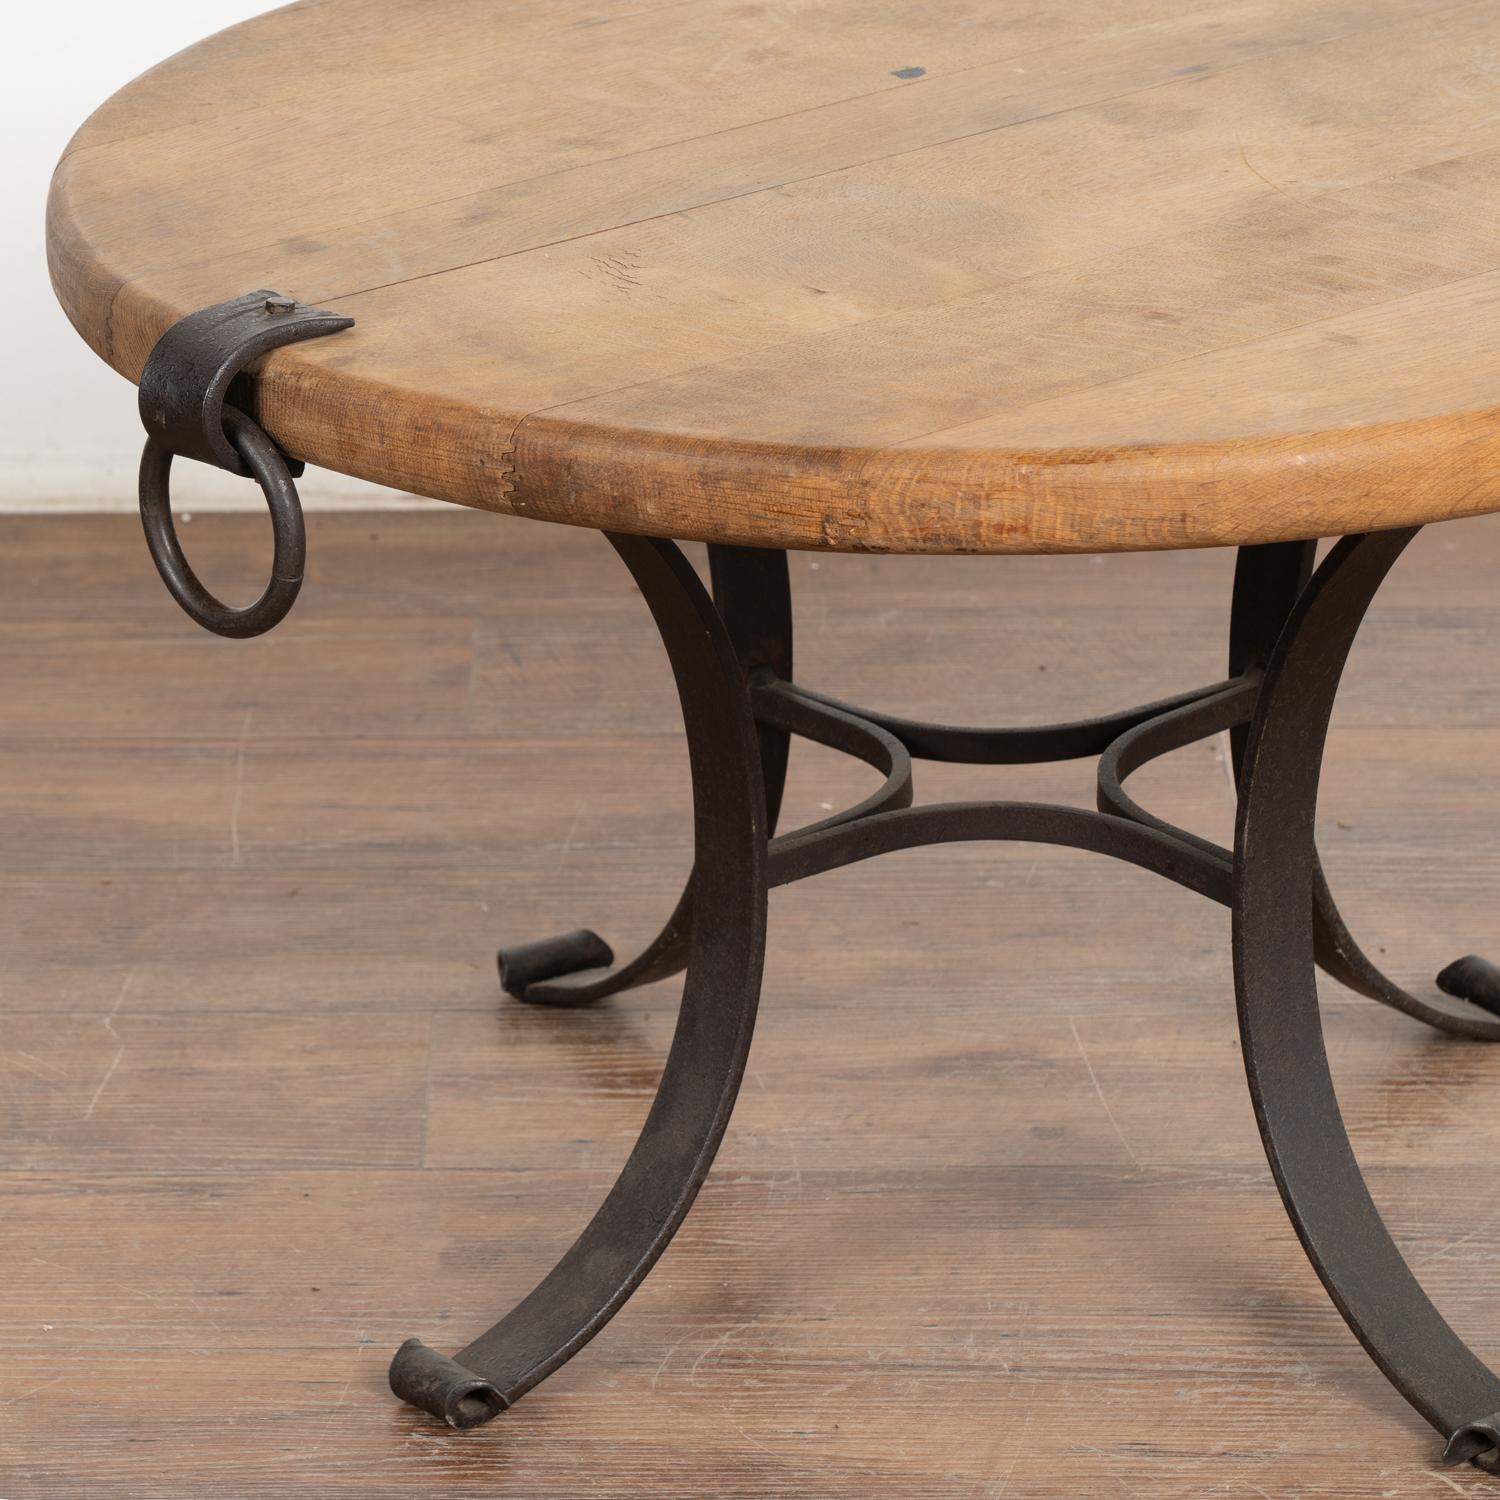 20th Century Small Round Coffee Table on Rustic Iron Base, France circa 1960-70 For Sale